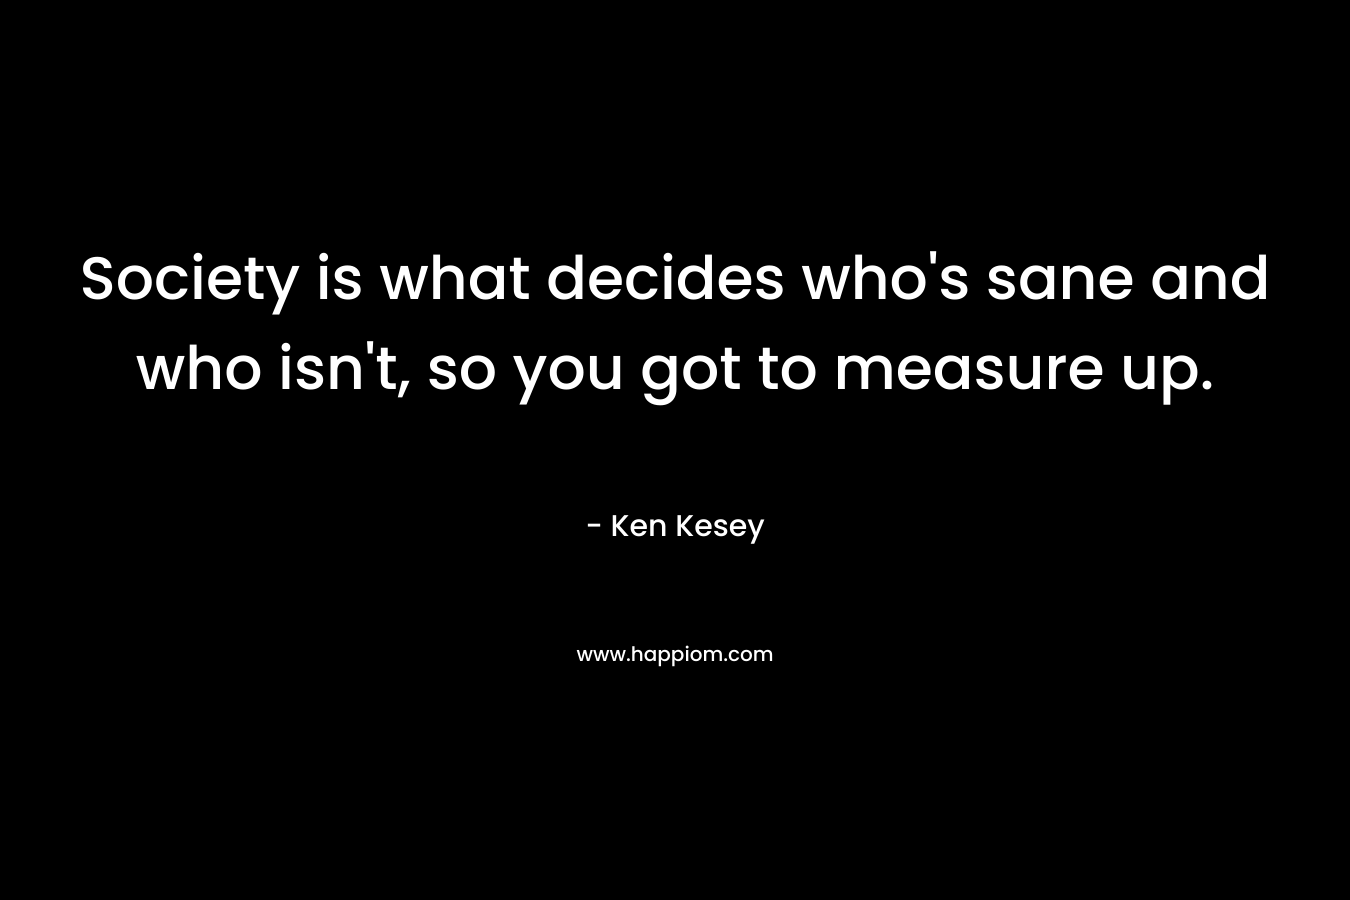 Society is what decides who's sane and who isn't, so you got to measure up.